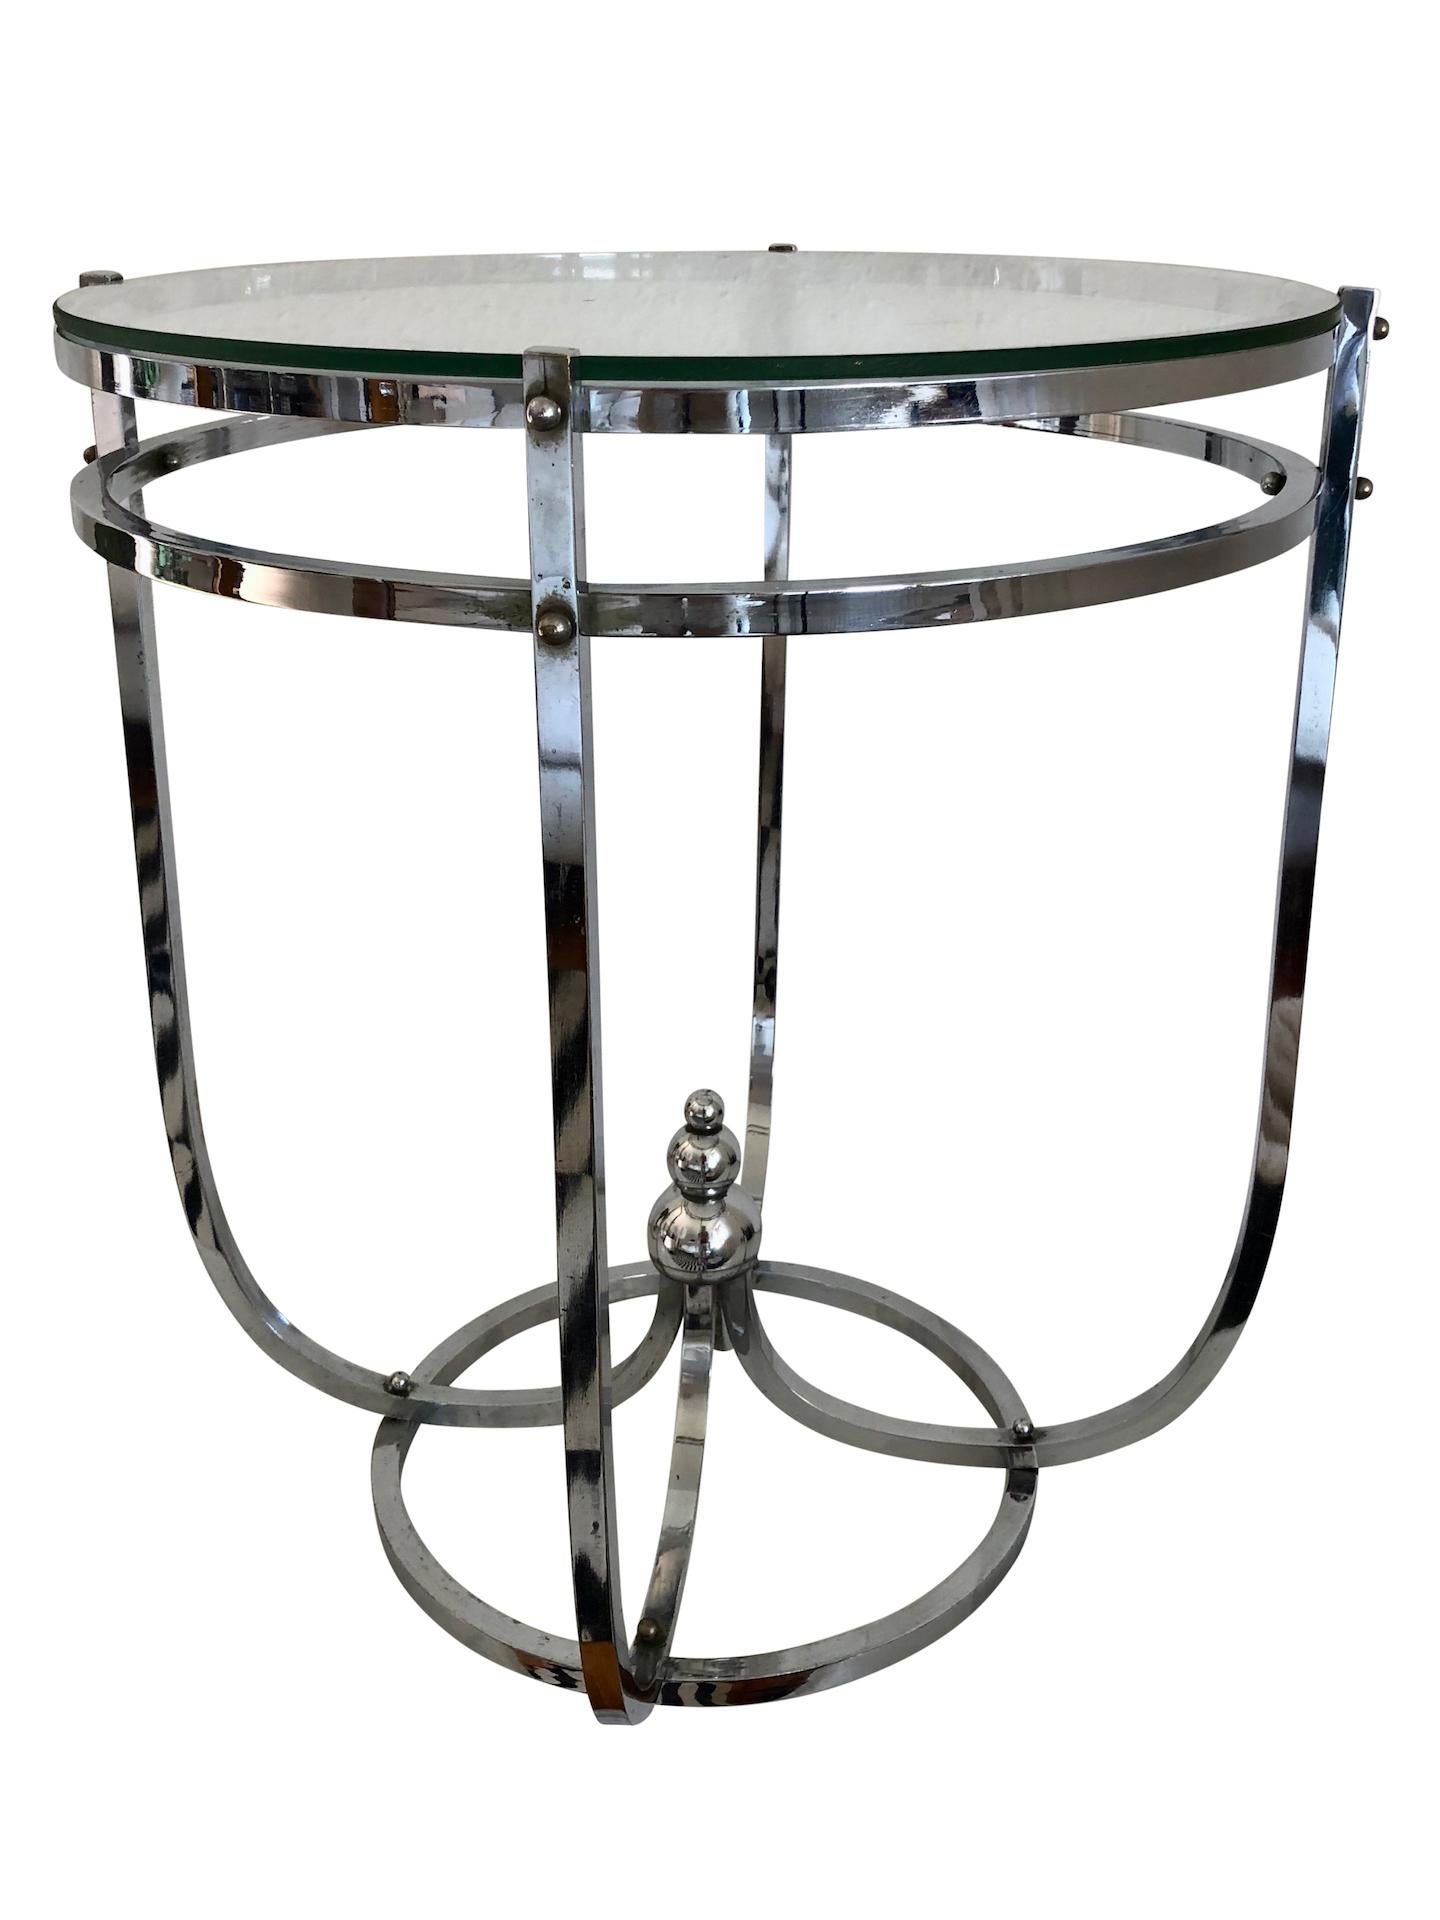 Modernistic side table / couch table
Original Art Deco, France 1930s.

Original chromed metal (probably brass), just cleaned, not polished to protect the original patina
7 mm glass tabletop (with slight surface scratches because of age and